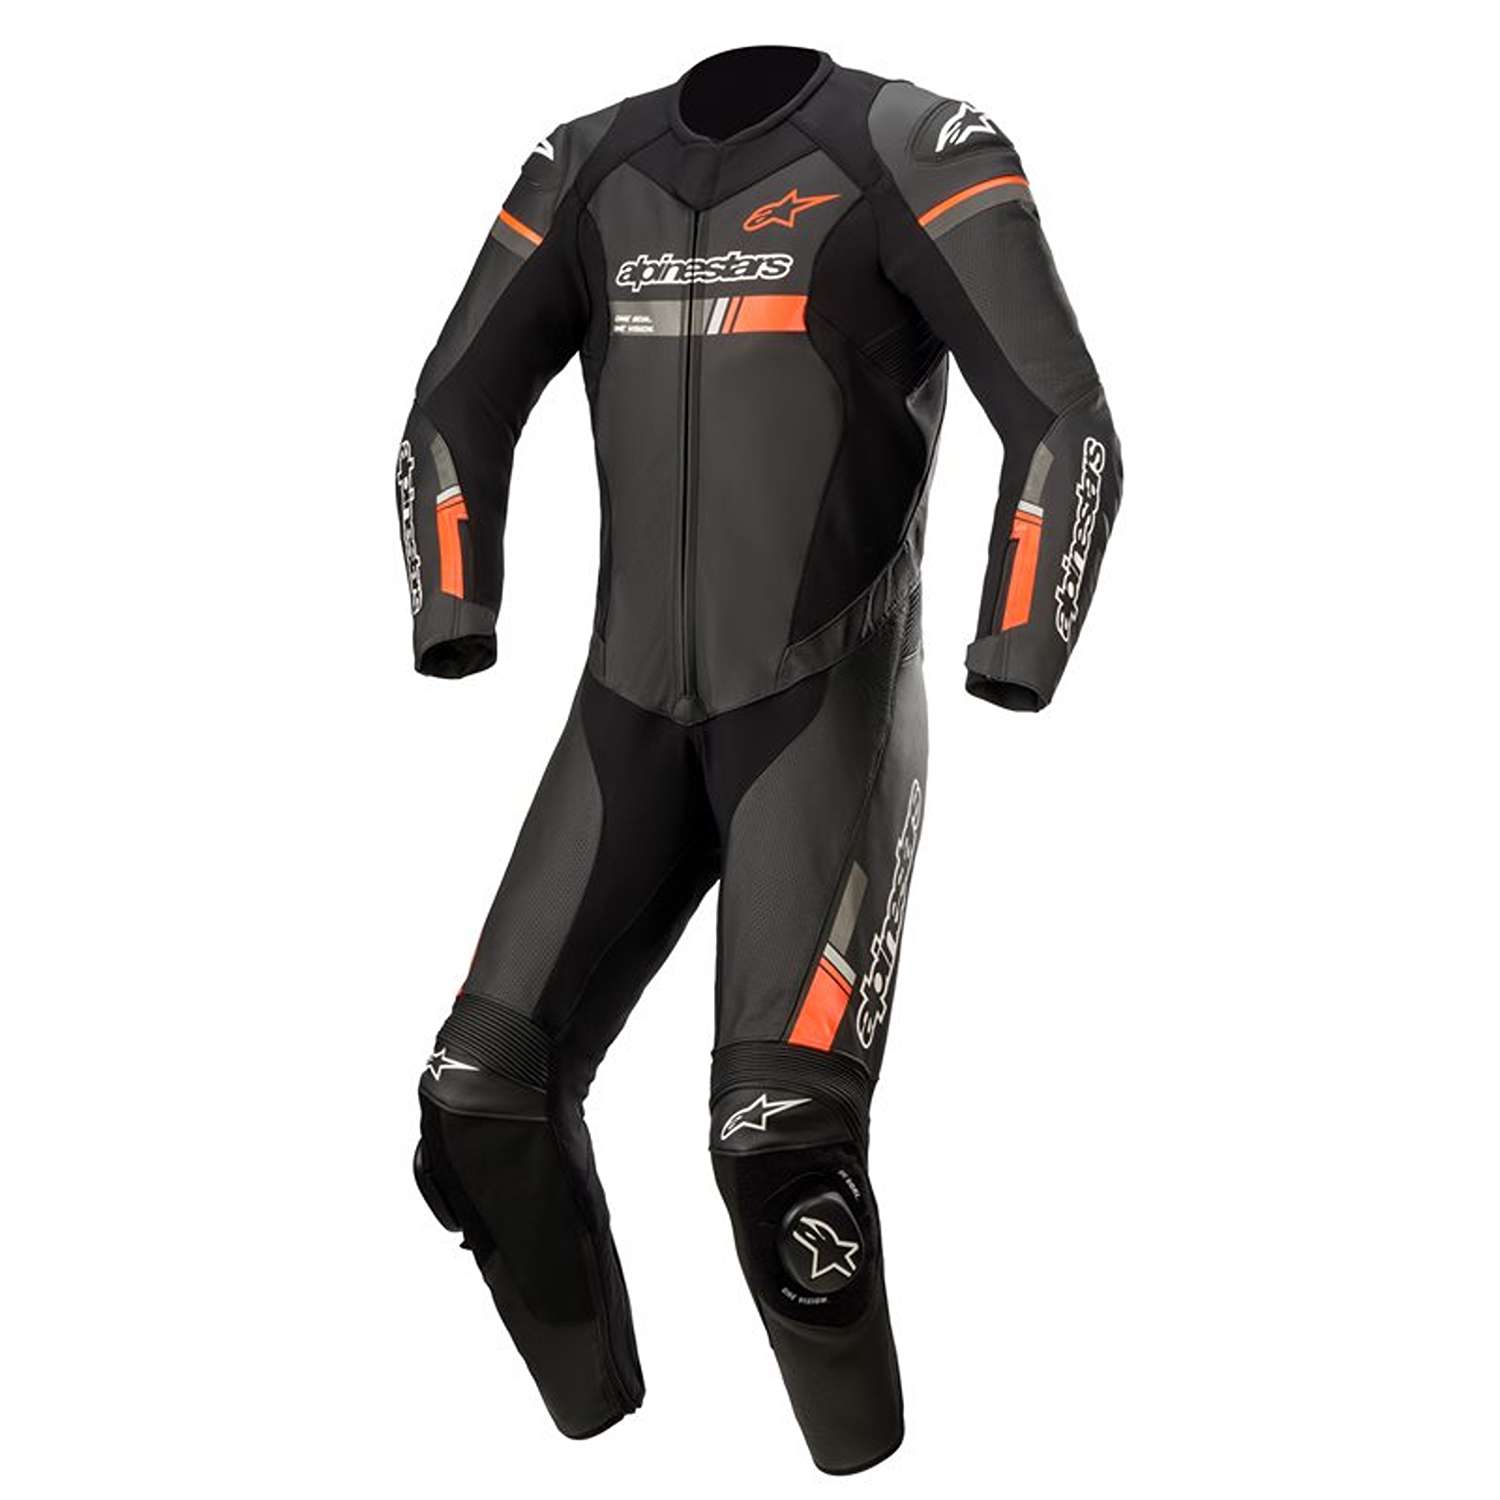 Image of Alpinestars Gp Force Chaser Leather Suit 1 Pc Black Red Fluo Size 50 ID 8059175351488